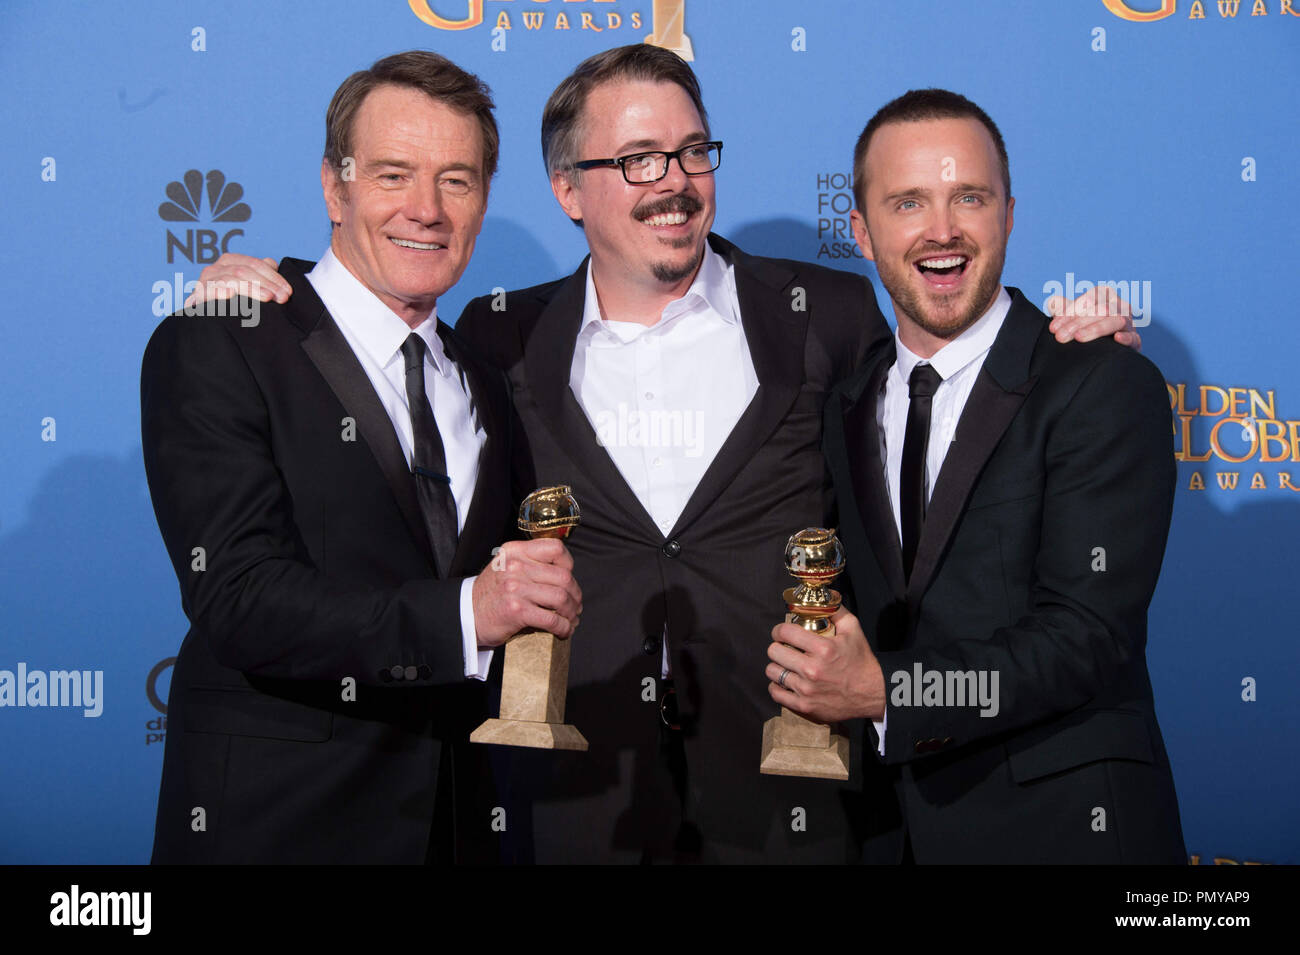 For BEST TELEVISION SERIES – DRAMA, the Golden Globe is awarded to “BREAKING BAD” (AMC), produced by Sony Pictures Television. Bryan Cranston, Vince Gilligan and Aaron Paul pose with the award backstage in the press room at the 71st Annual Golden Globe Awards at the Beverly Hilton in Beverly Hills, CA on Sunday, January 12, 2014.  File Reference # 32222 377JRC  For Editorial Use Only -  All Rights Reserved Stock Photo